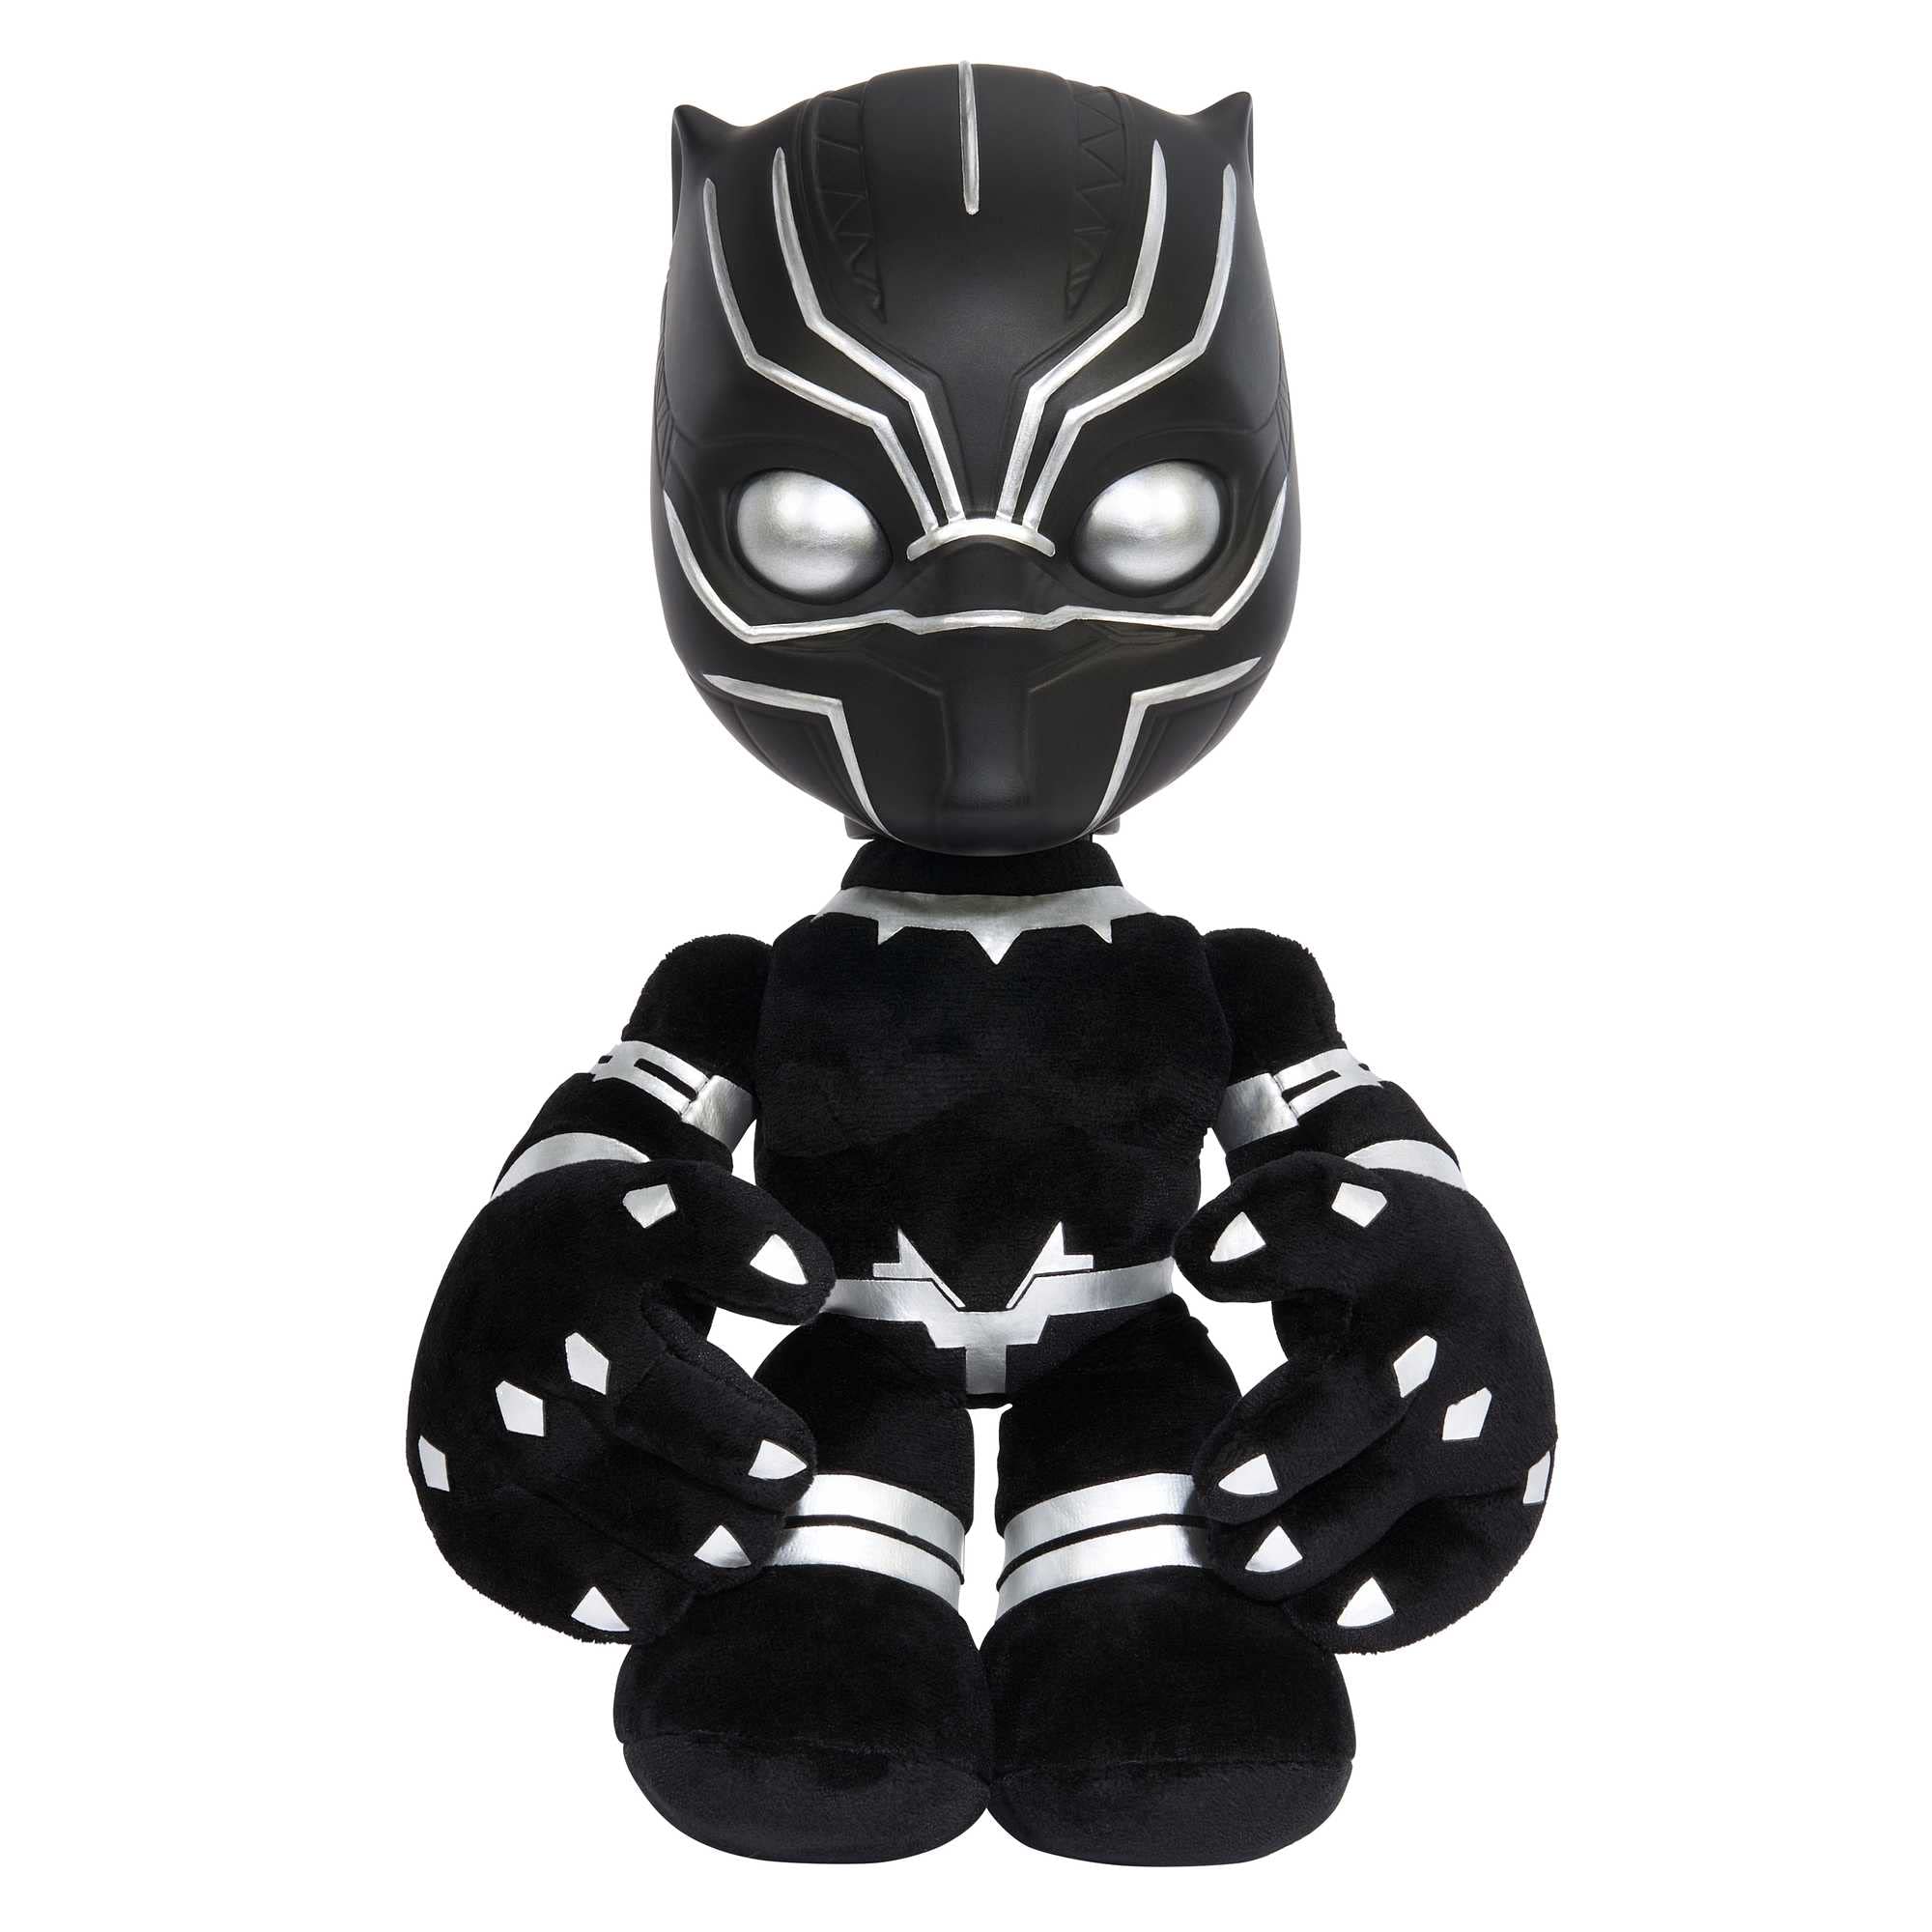 11" Mattel Marvel Black Panther Heart of Wakanda Plush Figure w/ Lights & Sounds $6.60 + Free Shipping w/ Prime or on $35+